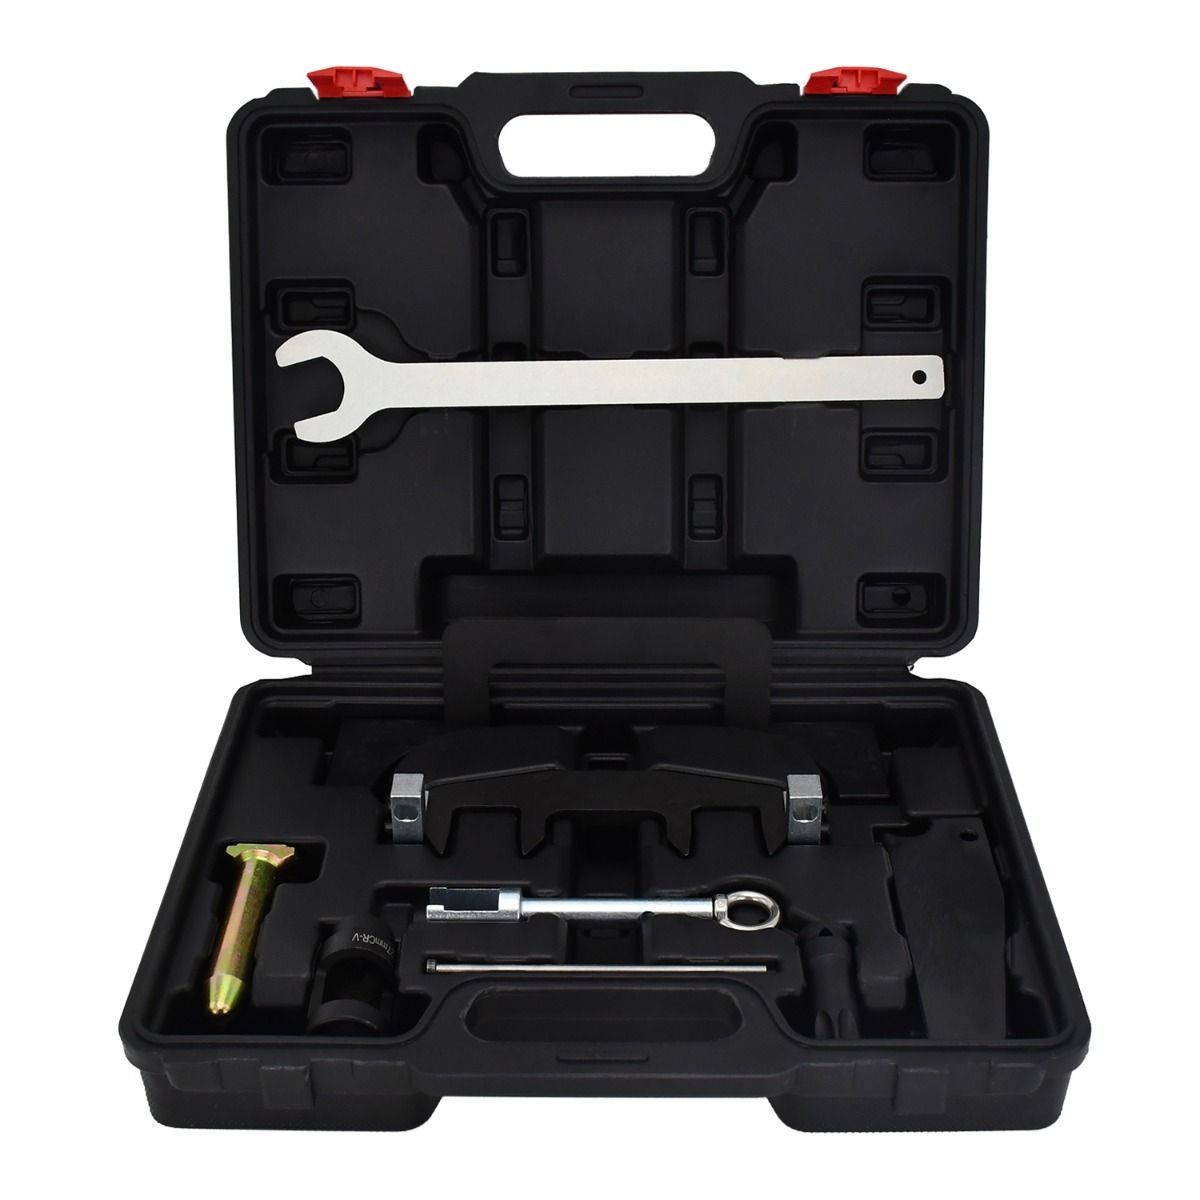 https://www.disenparts.com/media/catalog/product/cache/70745ea6da387e2fa88cef85cdfc7493/image/33308e13a/camshaft-adjuster-timing-chain-tool-kit-fuel-injector-remover-installer-kit-for-mercedes-benz.jpg